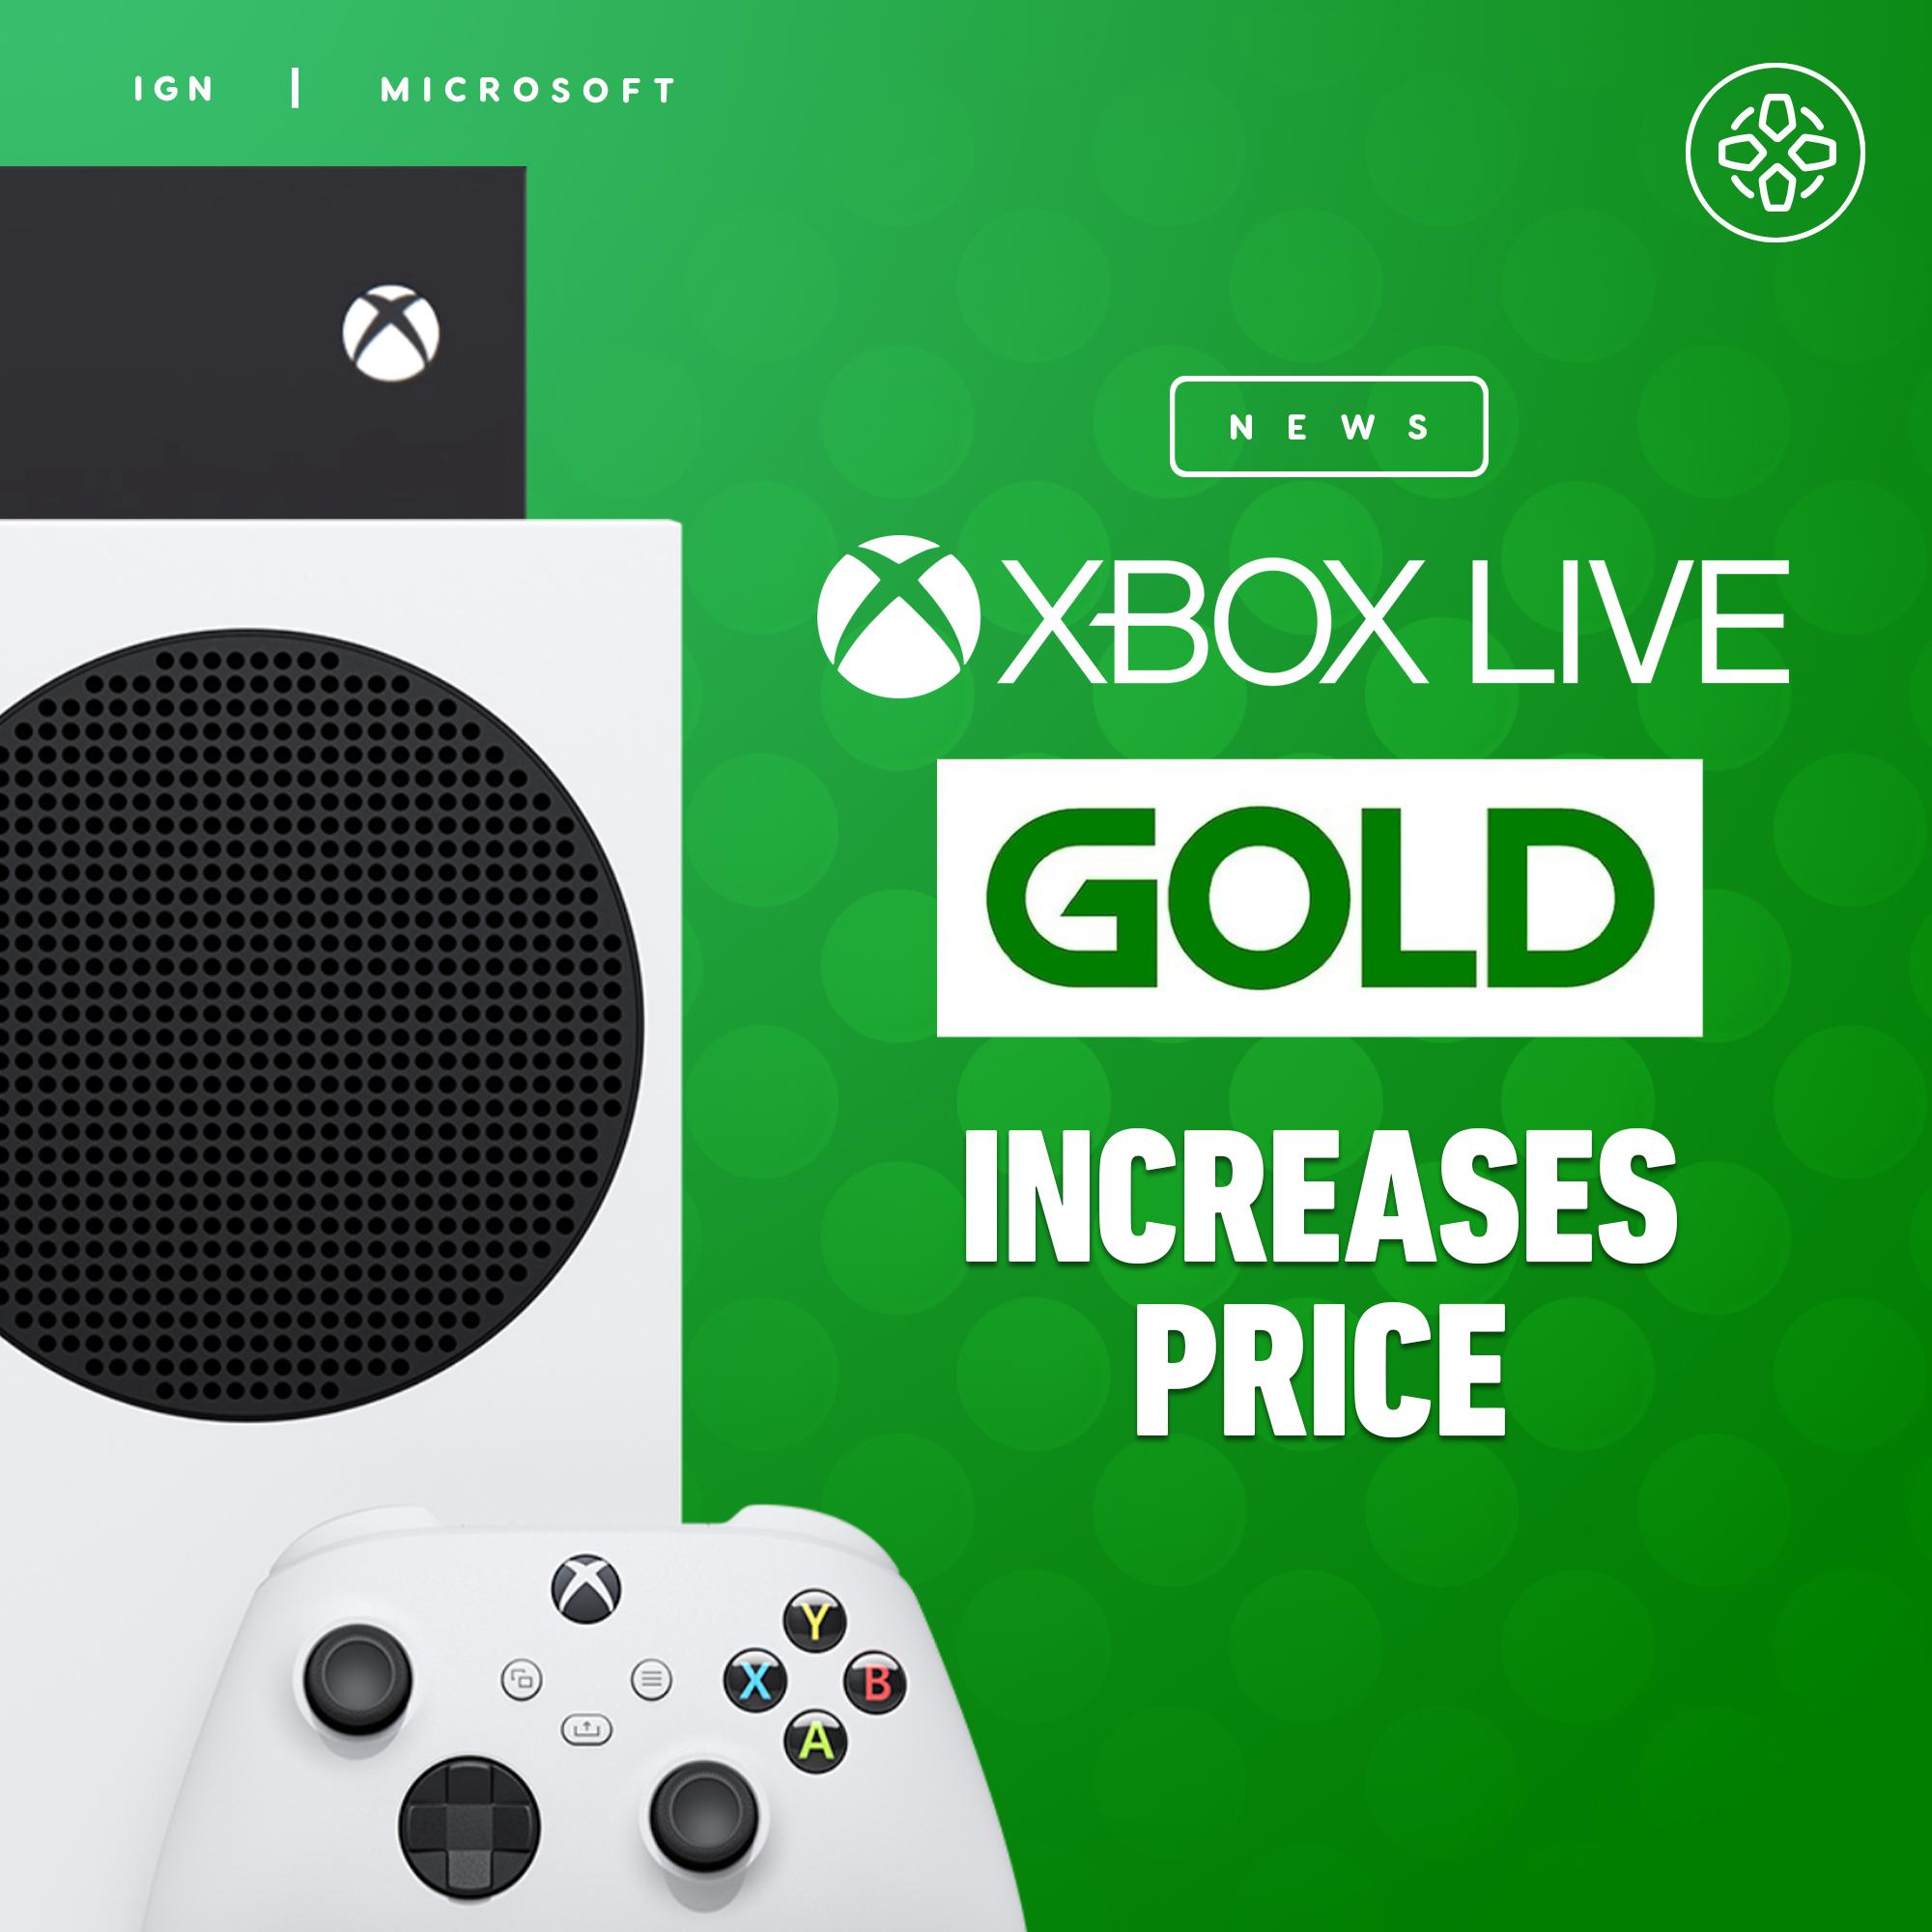 Luidruchtig bodem voering IGN on Twitter: "Xbox Live Gold will increase to $11 for one month, $30 for  three months, and $60 for six months - if you already have a subscription,  your price won't